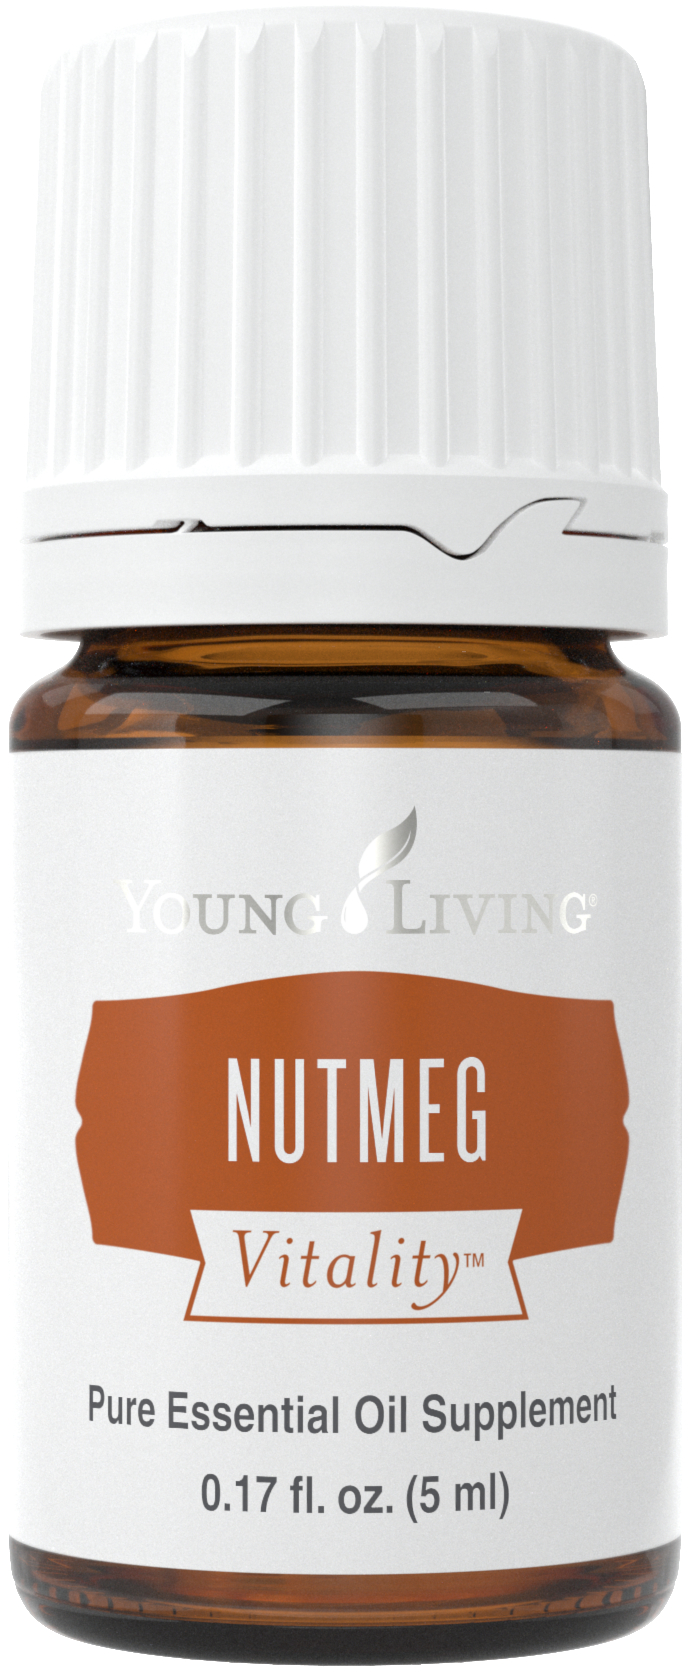 Manfaat nutmeg young living Sanctions Policy